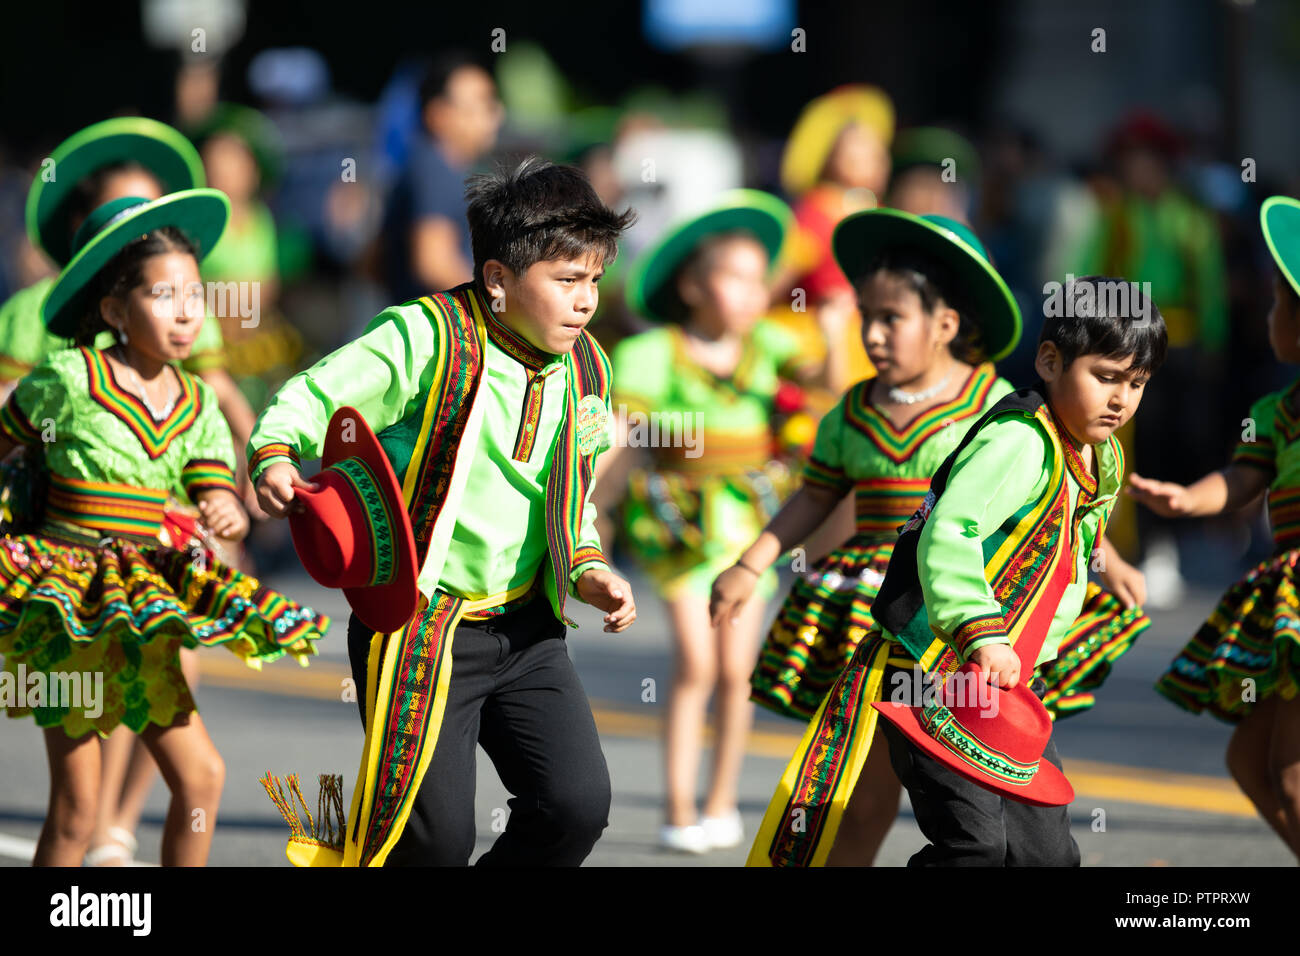 Washington, D.C., USA - September 29, 2018: The Fiesta DC Parade, children from bolivia wearing traditional clothing dancing Stock Photo